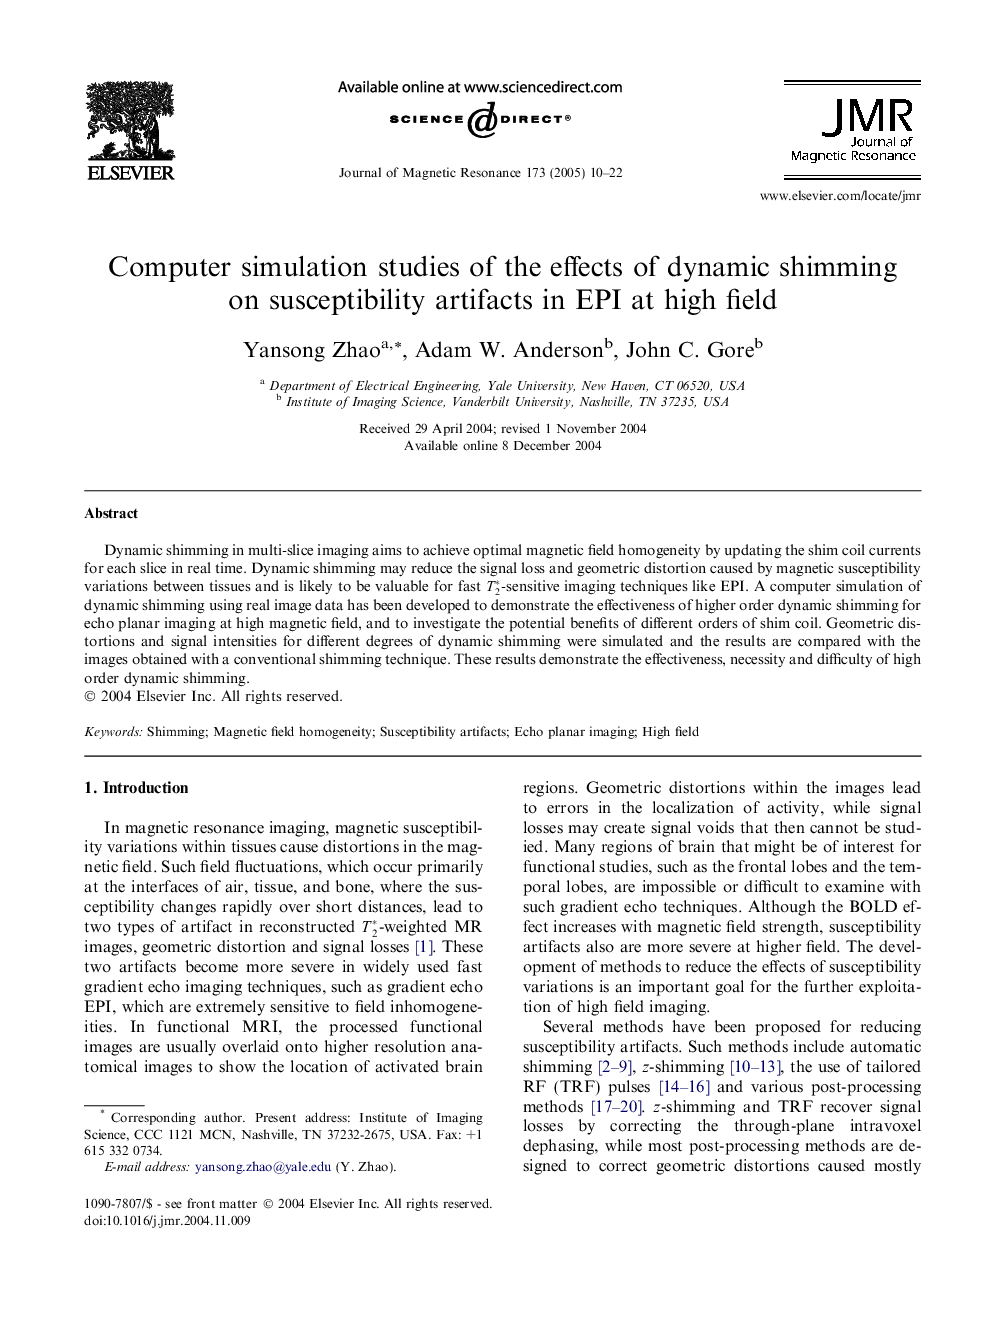 Computer simulation studies of the effects of dynamic shimming on susceptibility artifacts in EPI at high field